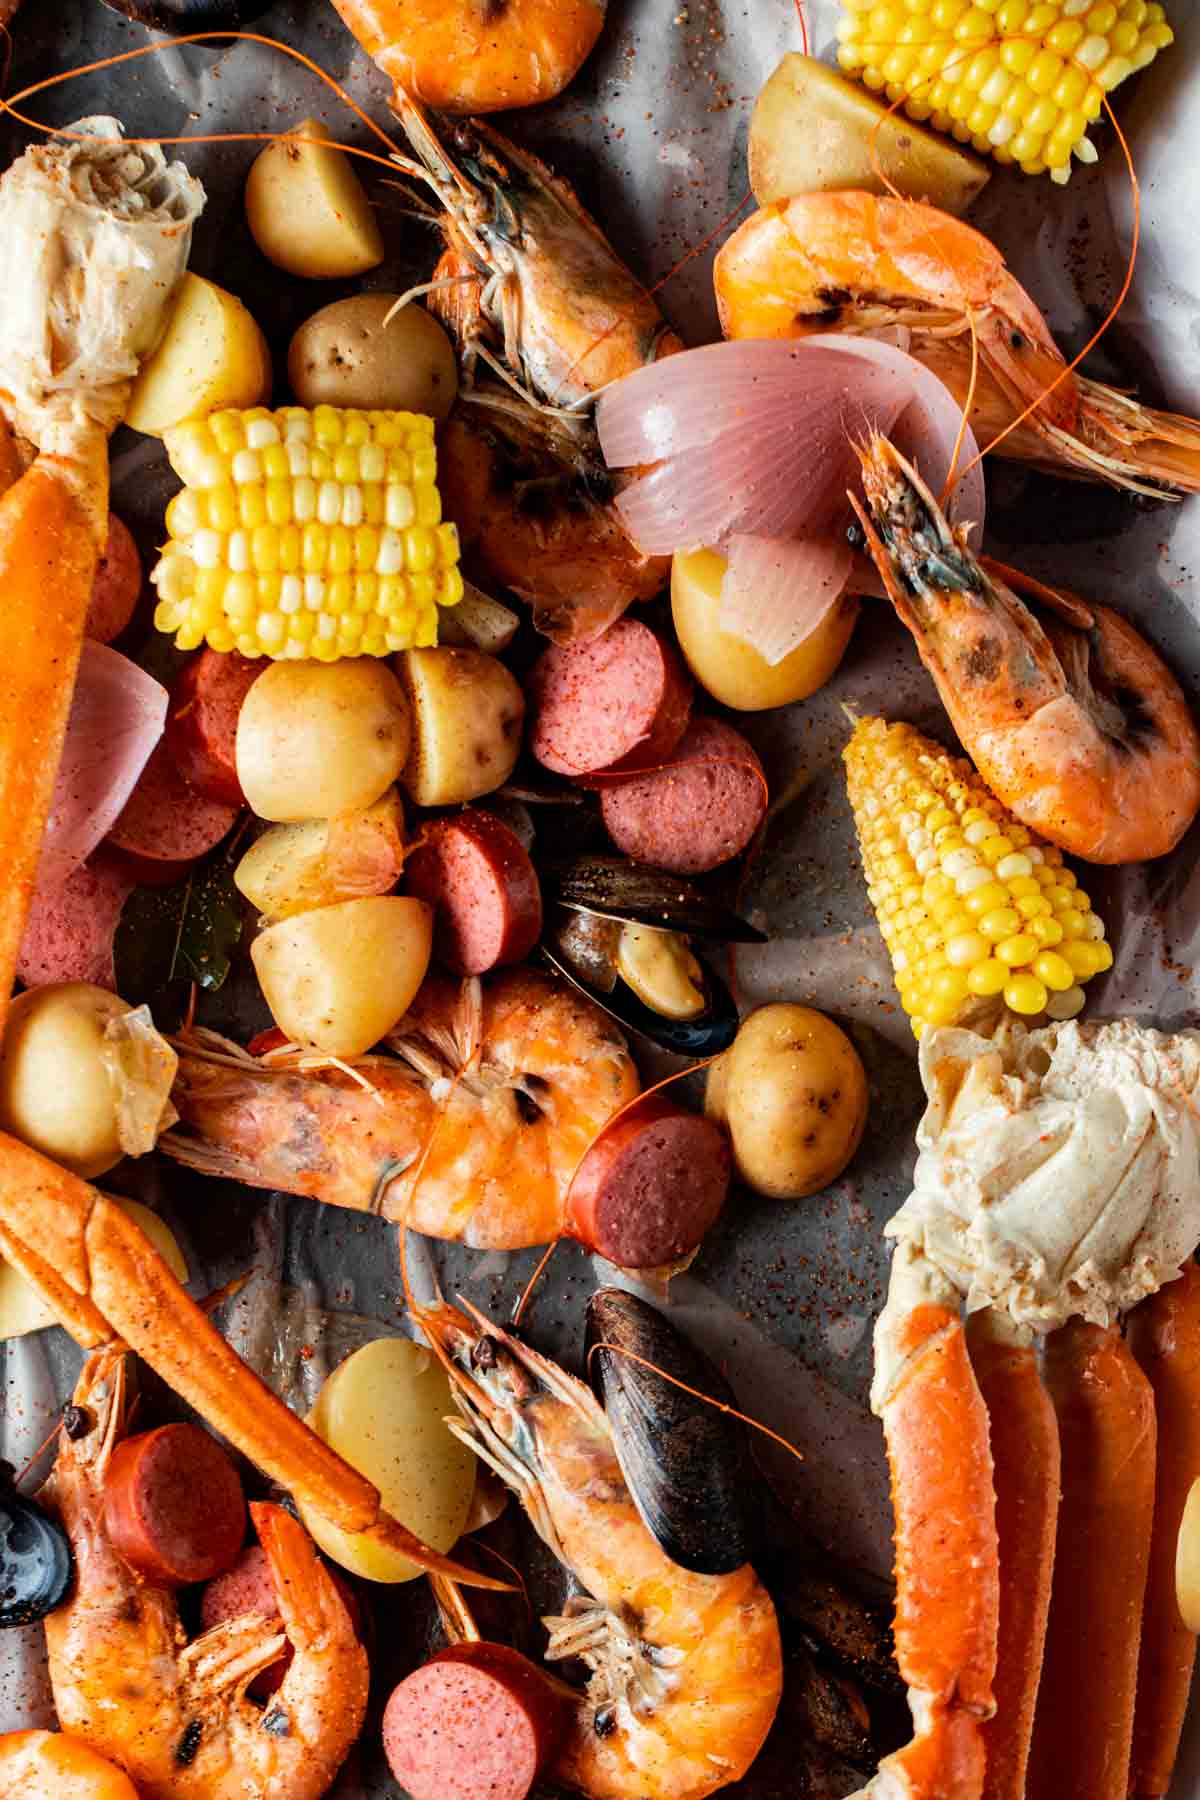 shellfish, sausage, corn and potatoes spread out on a table over brown paper